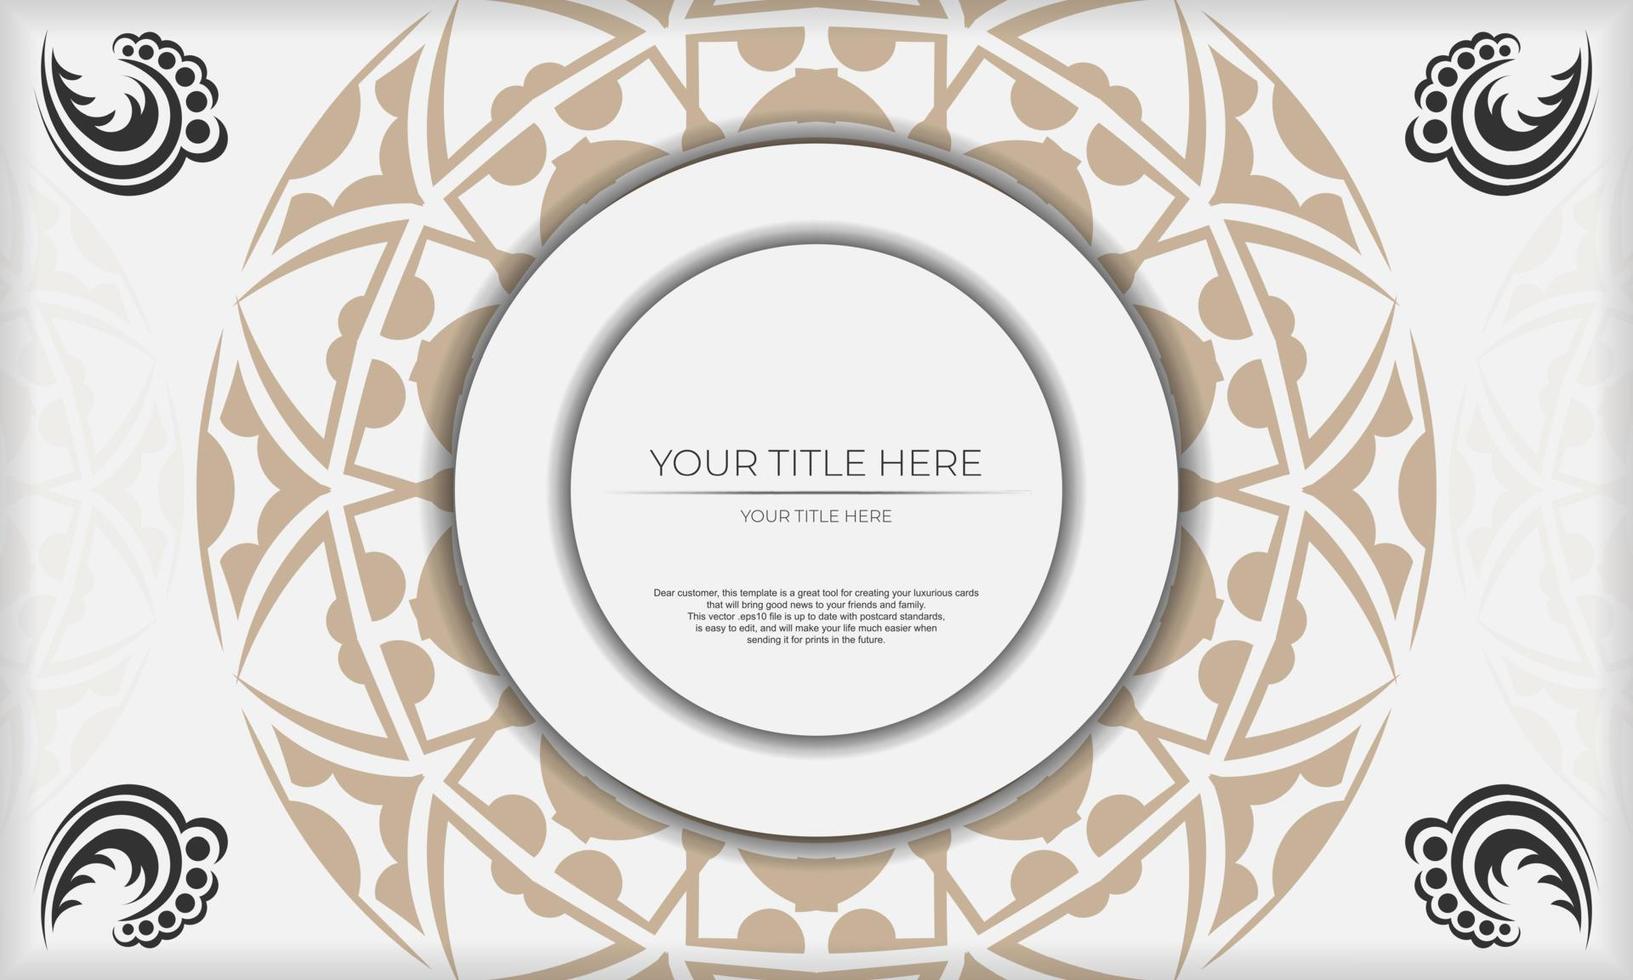 Postcard design with Greek patterns. White template with ornaments and place for your logo. vector